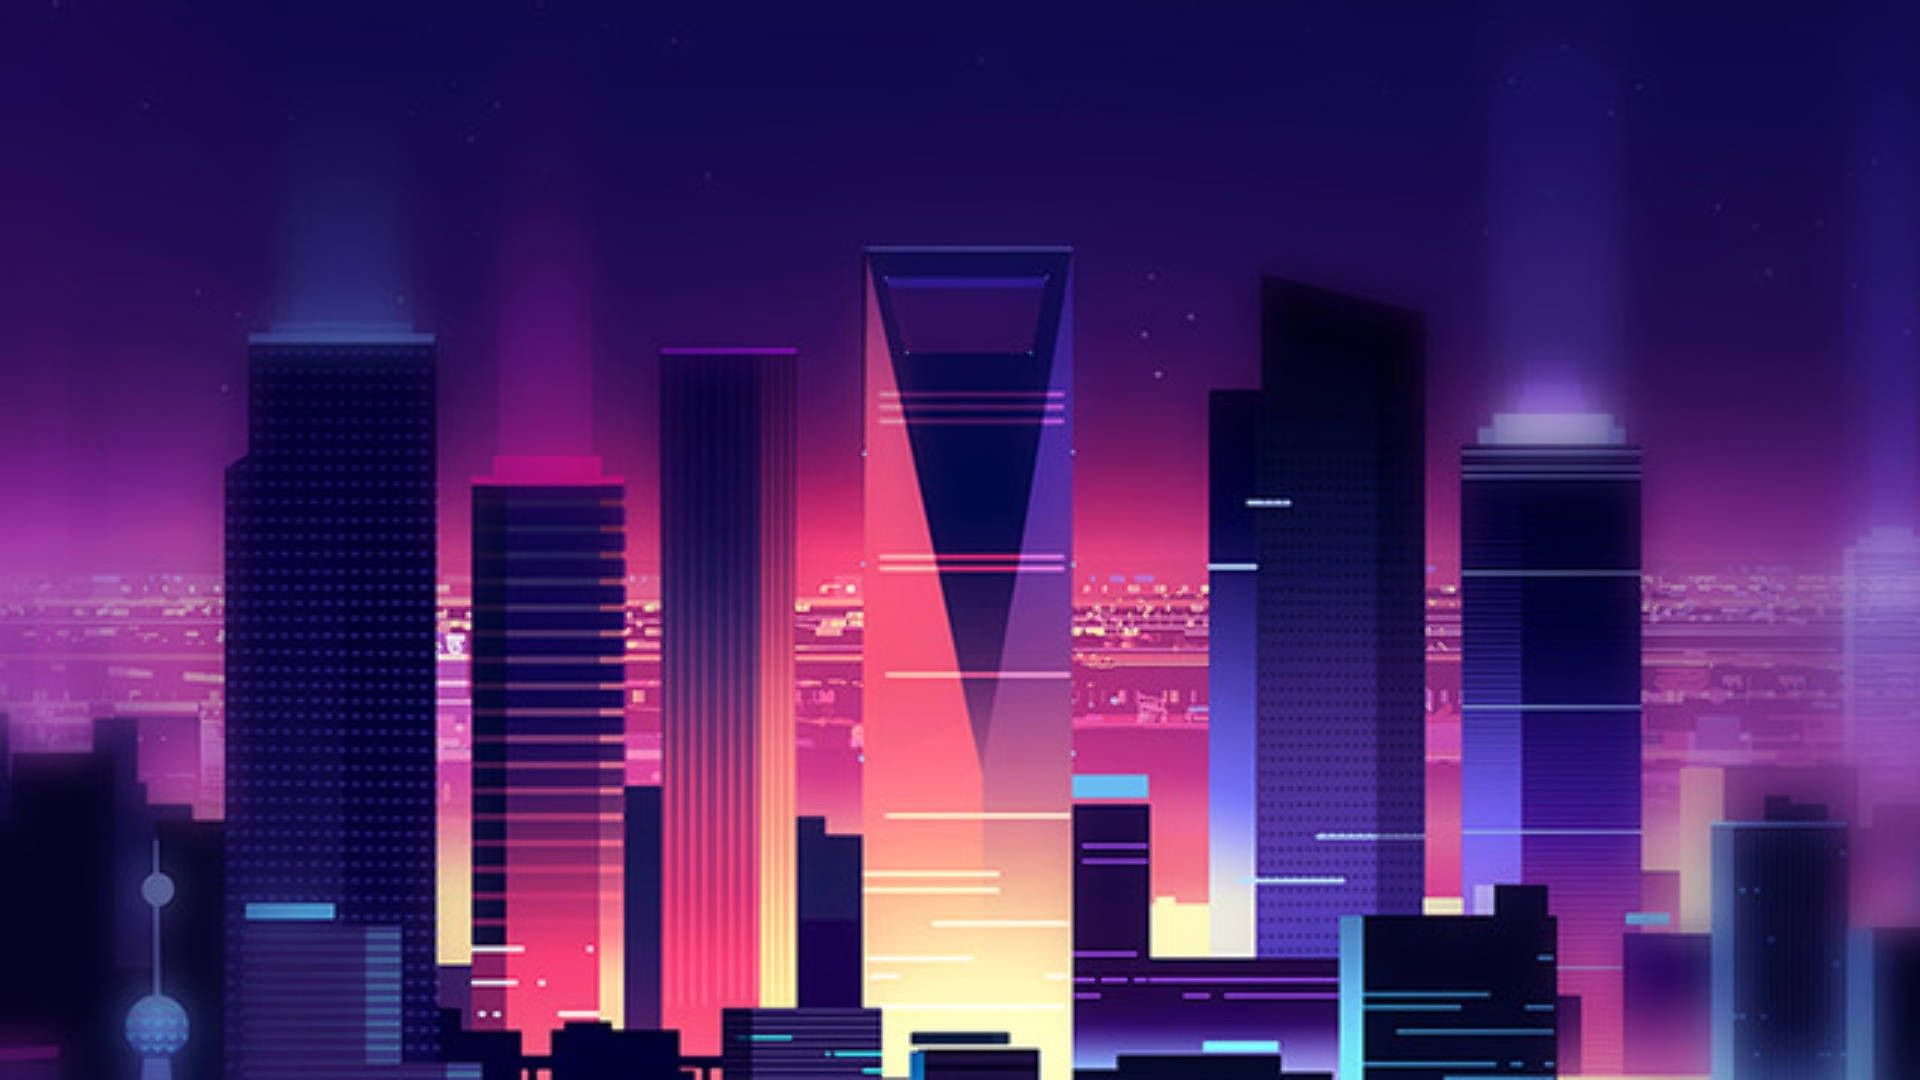 Neon Purple Aesthetic Wallpapers for